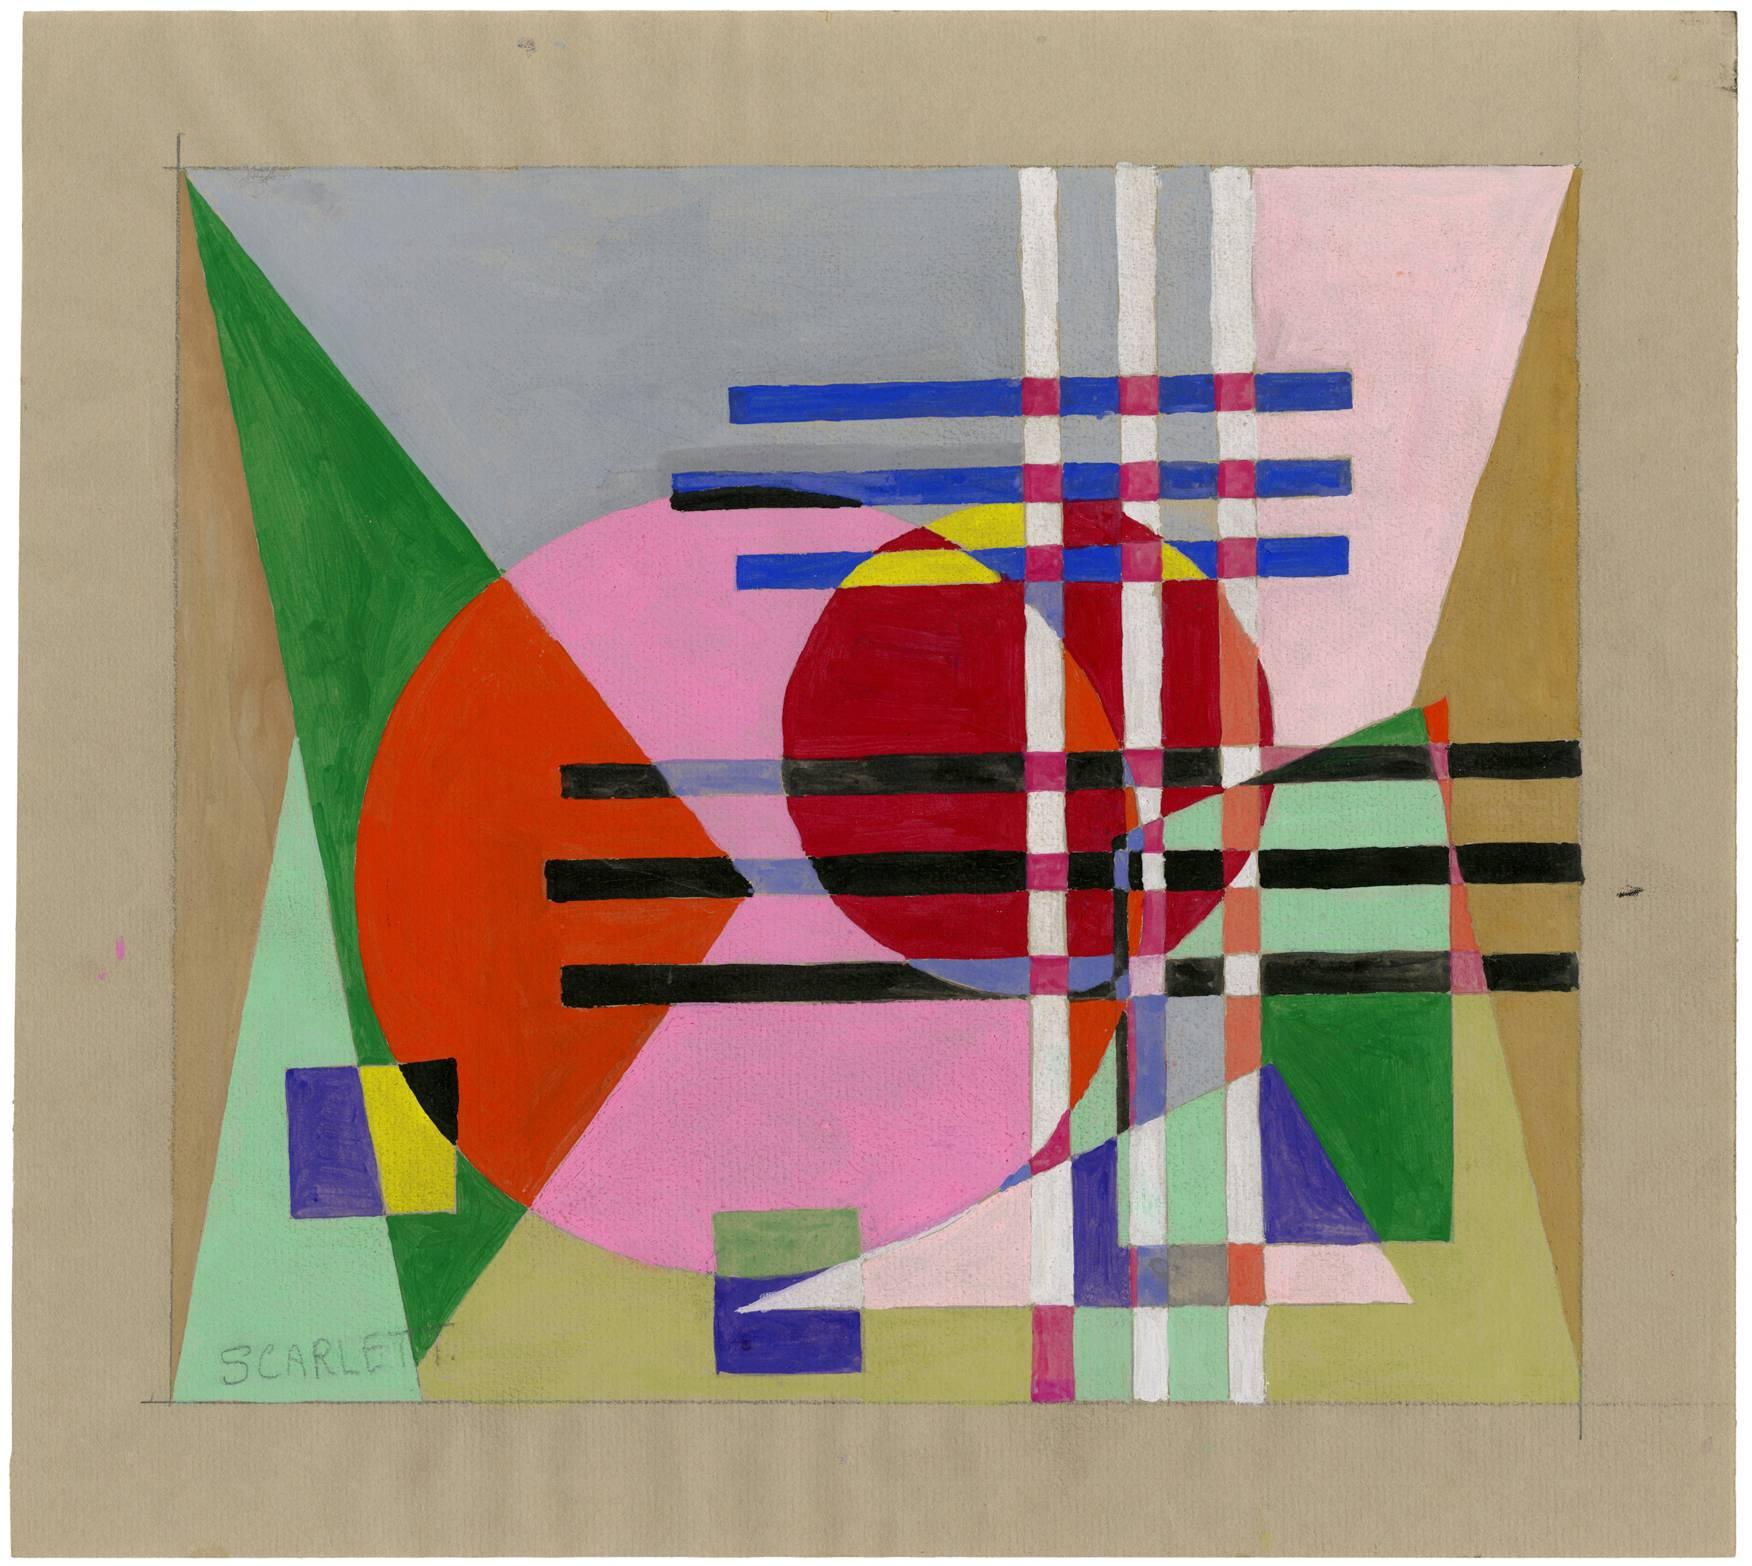 Gouache and pencil on buff wove paper, c. 1940. Signed in pencil, lower left. Image size 9 1/2 x 10 7/8 inches (241 x 267 mm); sheet size 12 x 13 1/4 inches (305 x 337 mm). A fine mid-century modernist, geometric abstraction, with clean, fresh